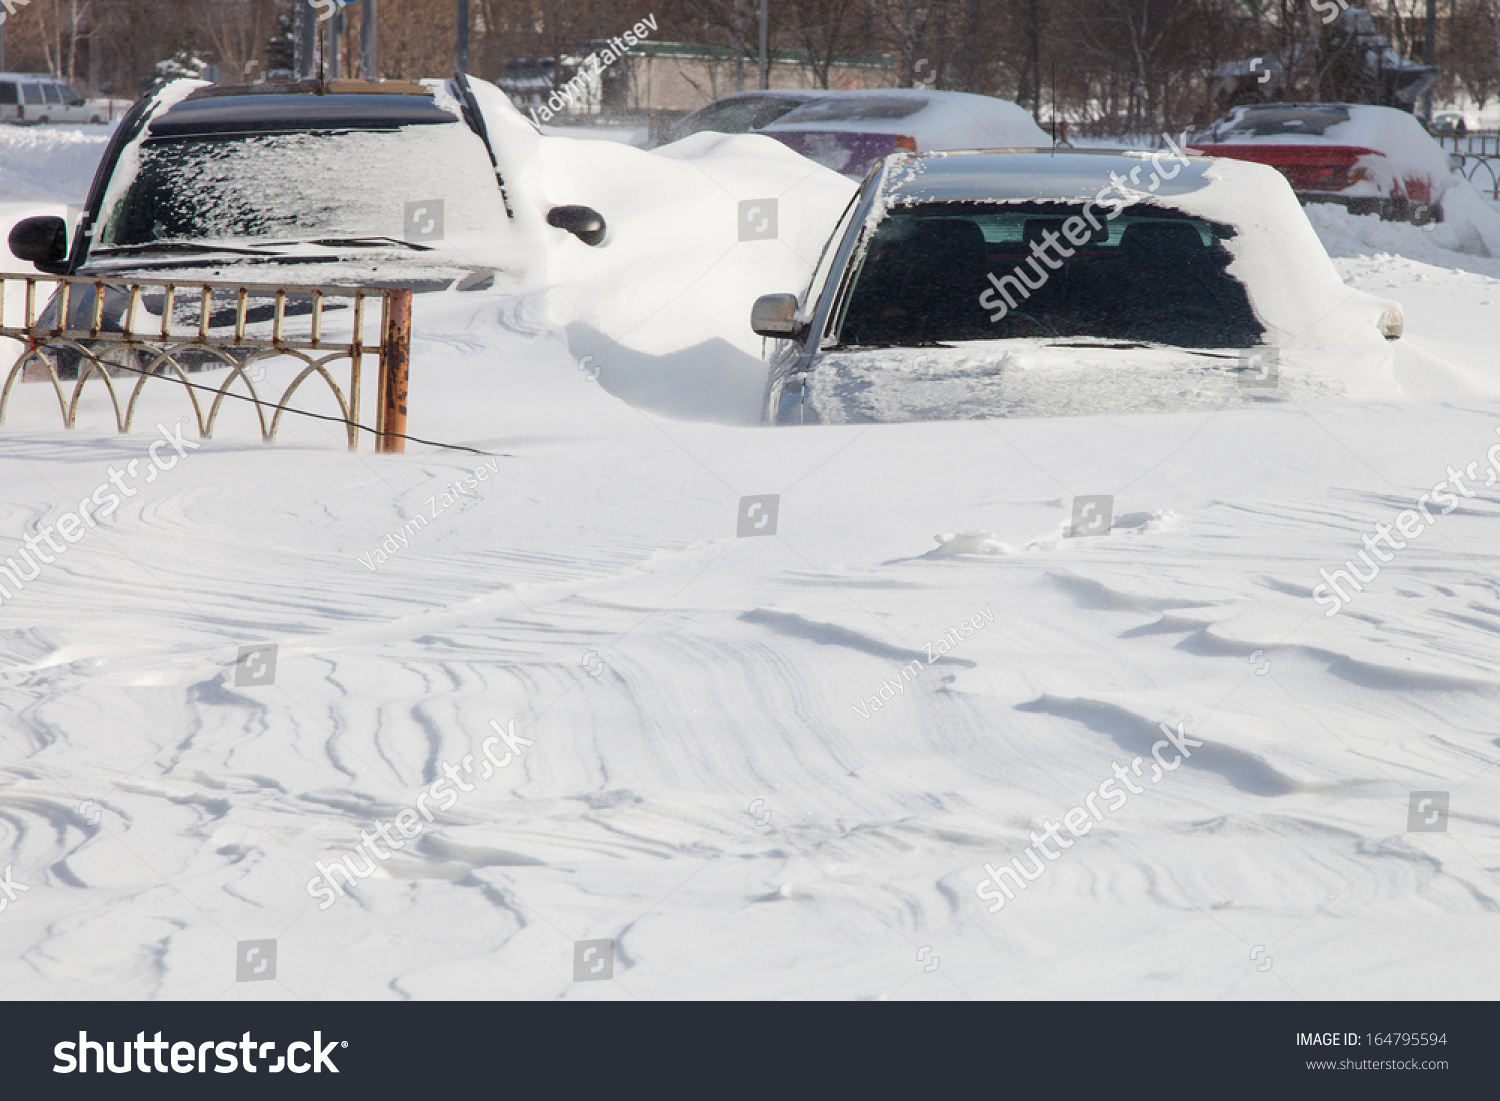 Cars Covered In Snow After A Blizzard Stock Photo 164795594 : Shutterstock